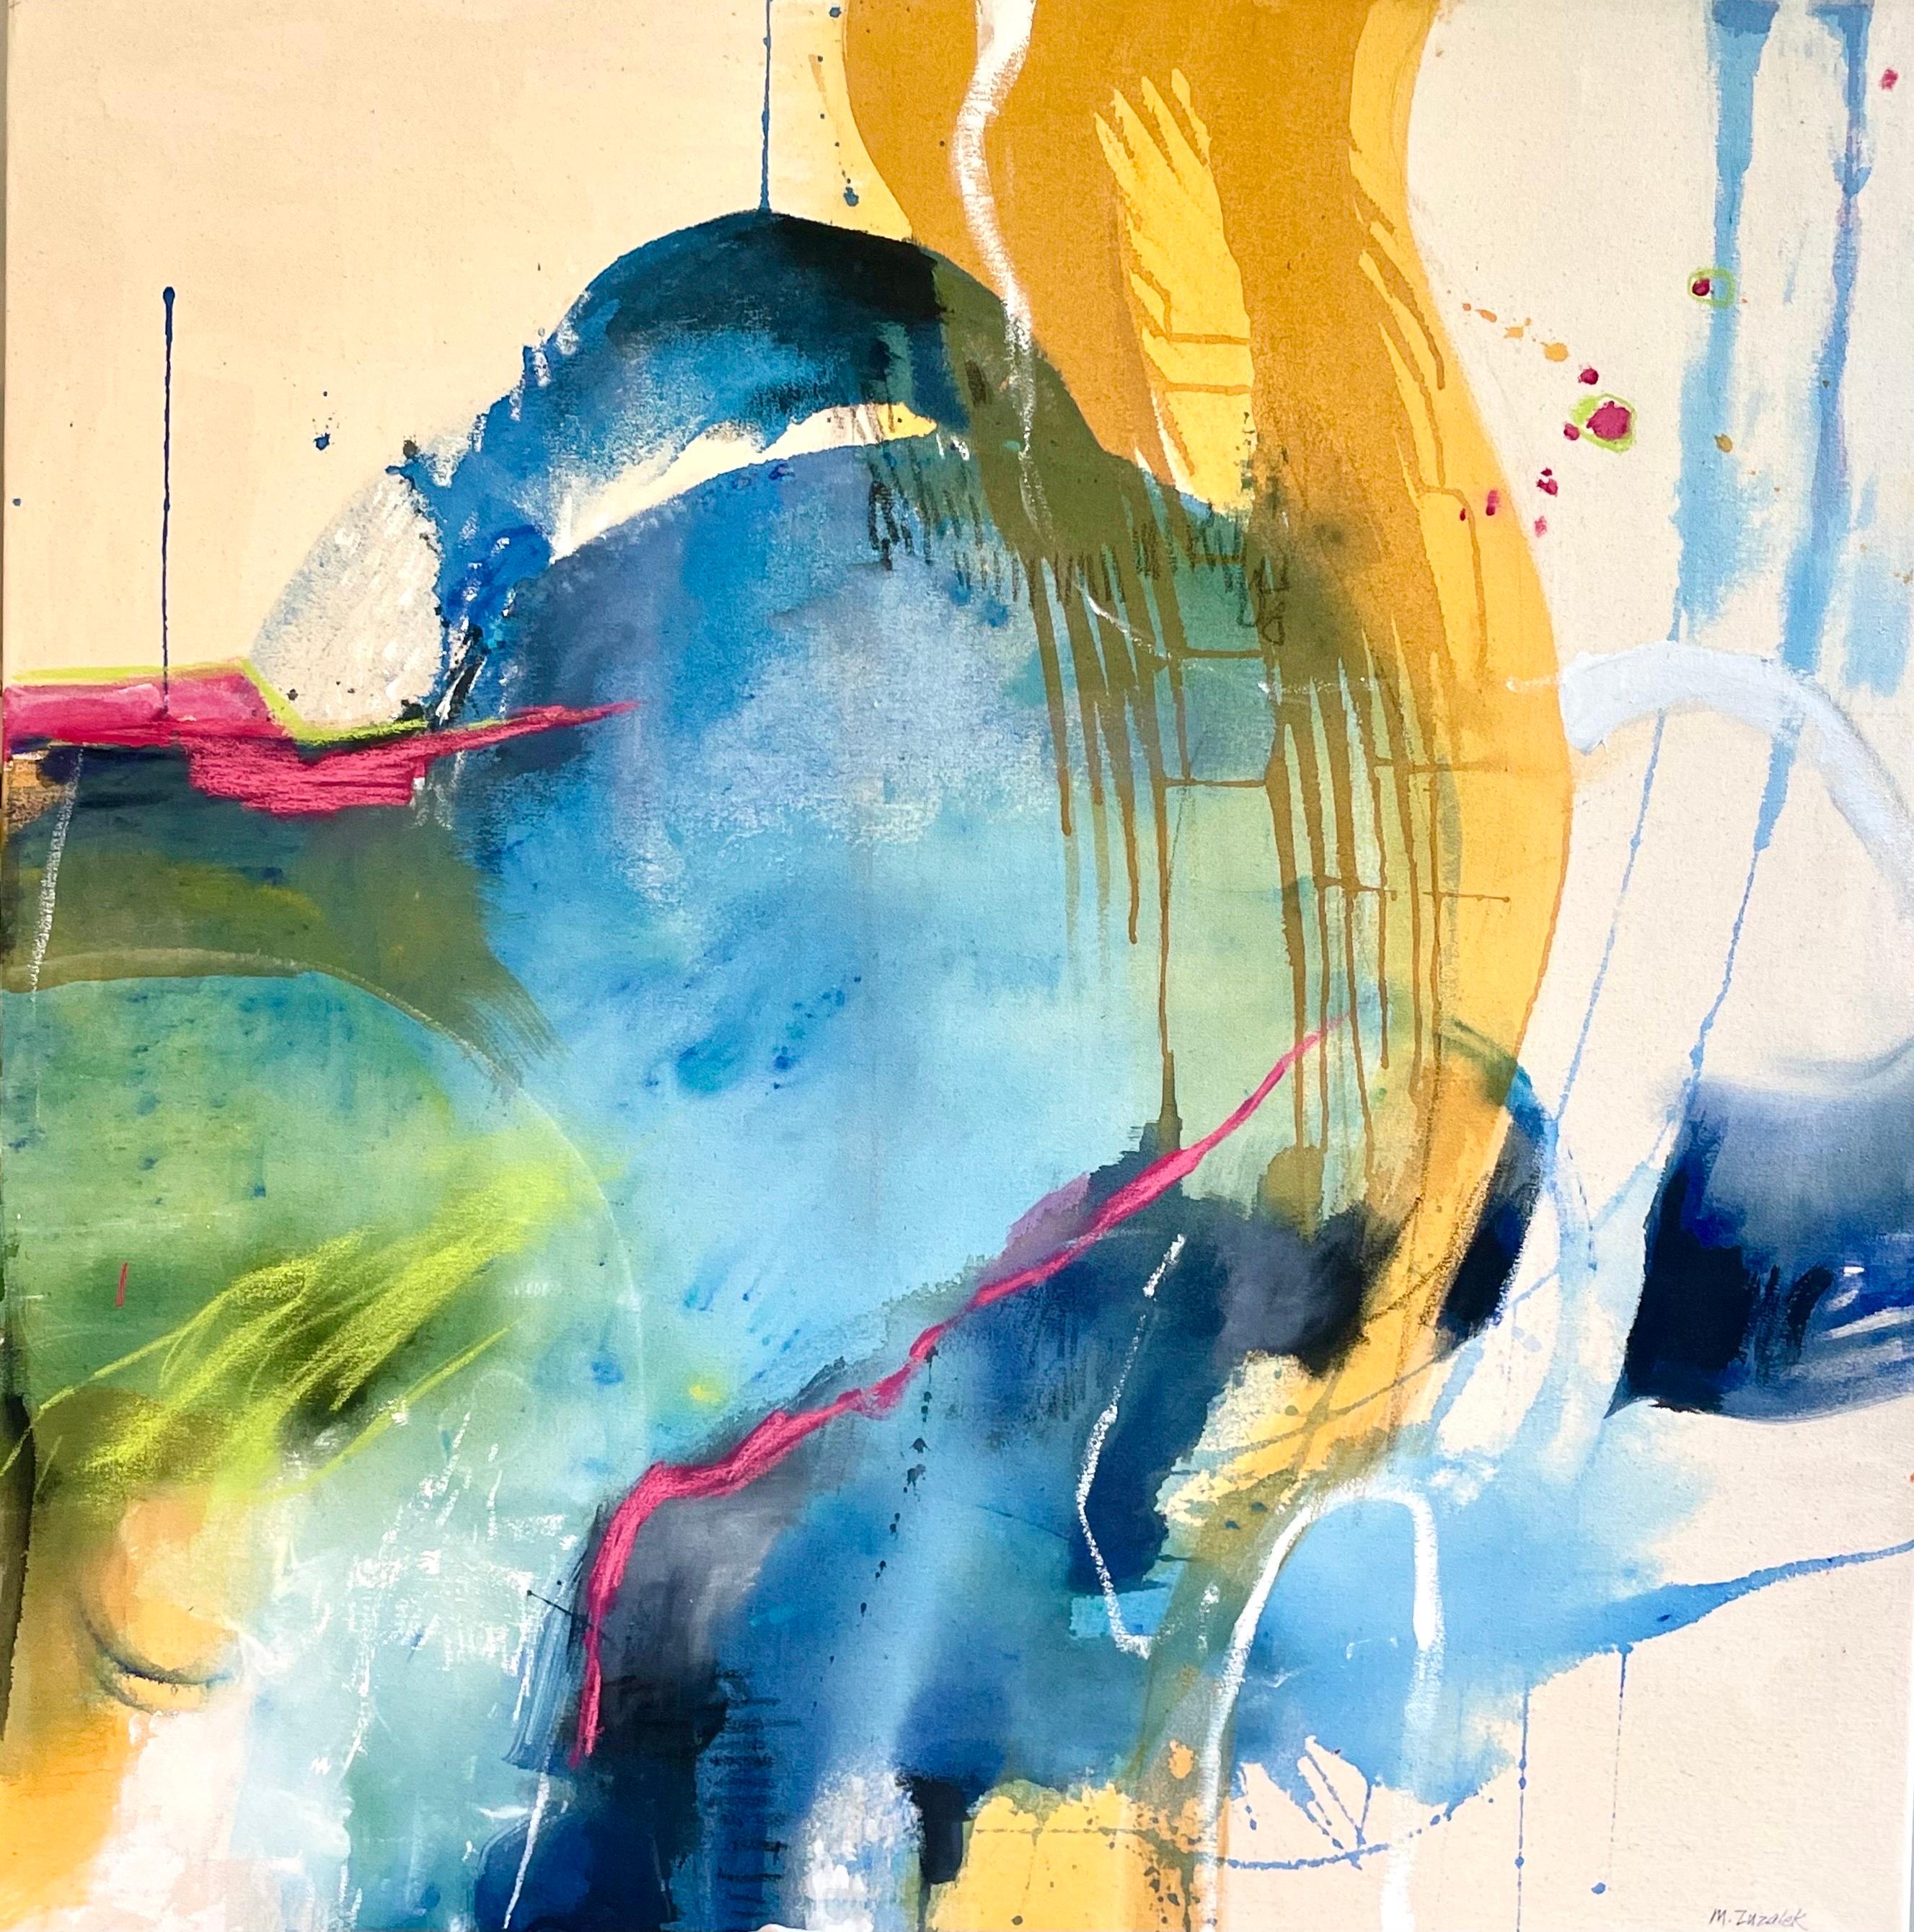 Original contemporary modern abstract painting titled Joy of Chance - Painting by Michele Zuzalek